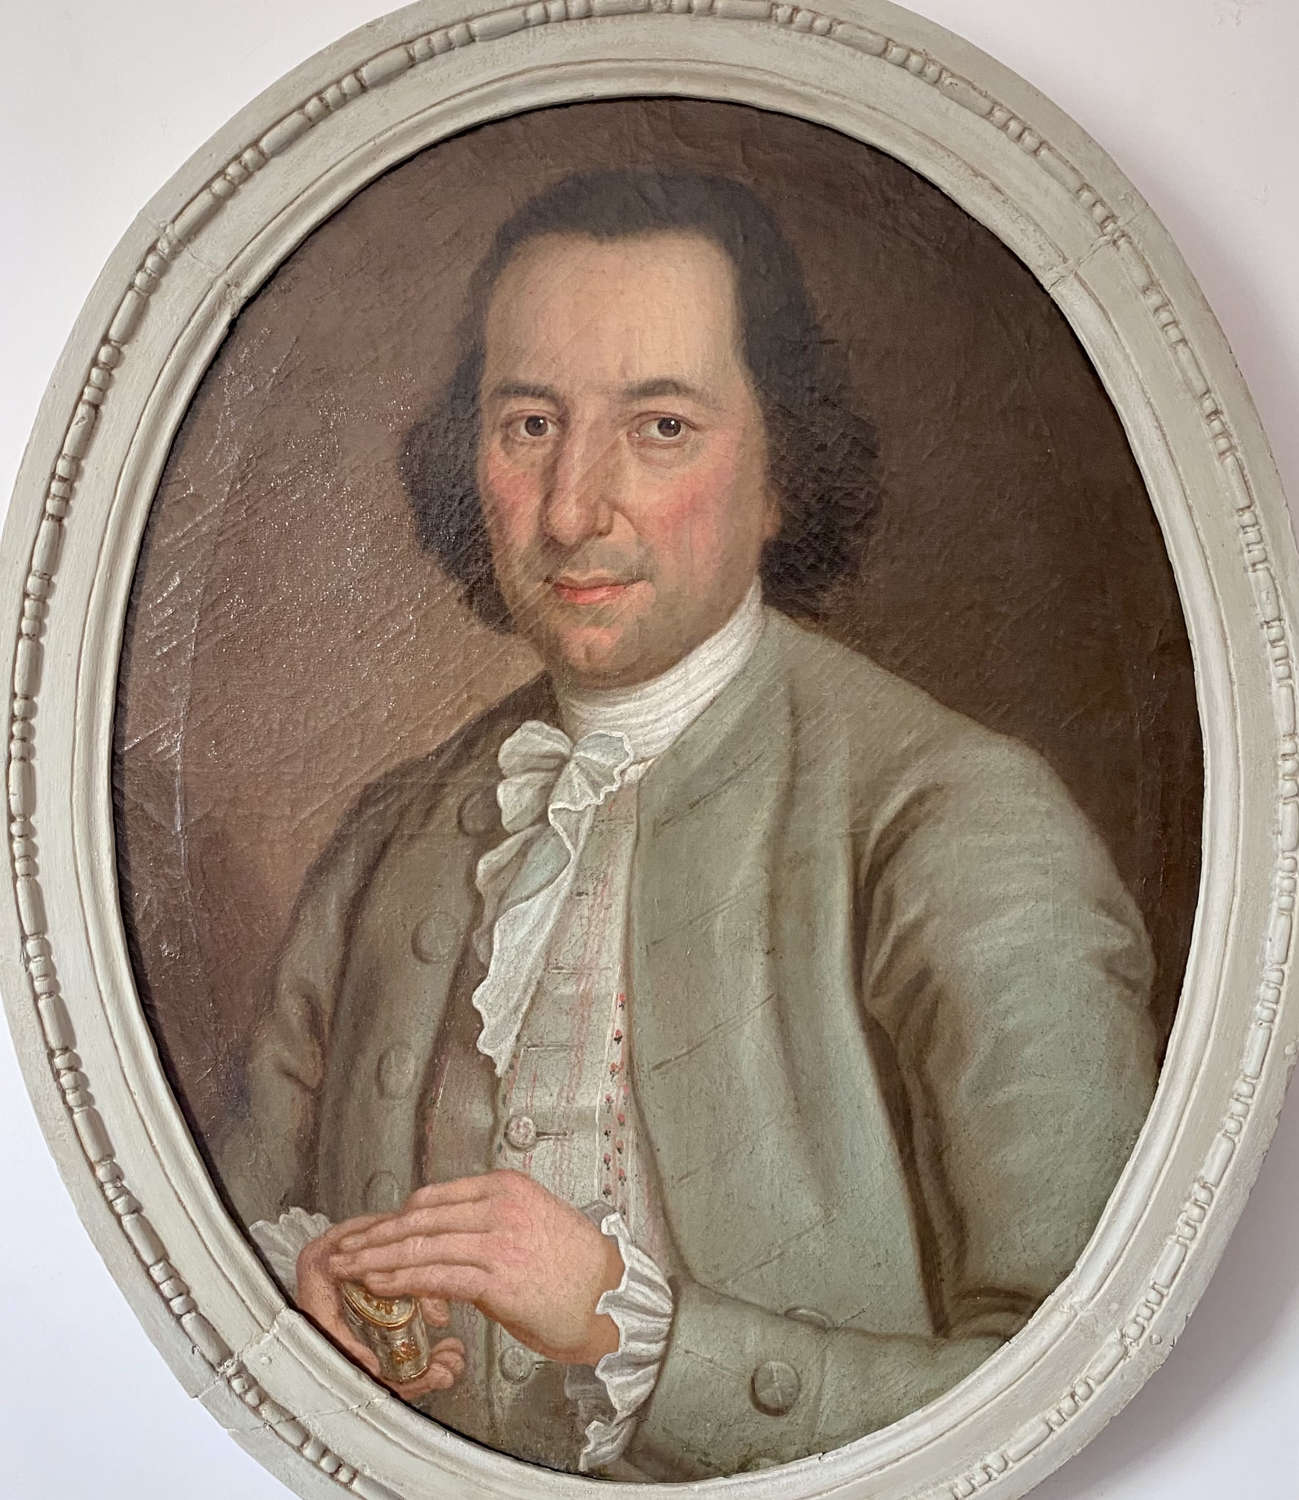 The Humanist: 18th Century Oval portrait of an Aristocrat